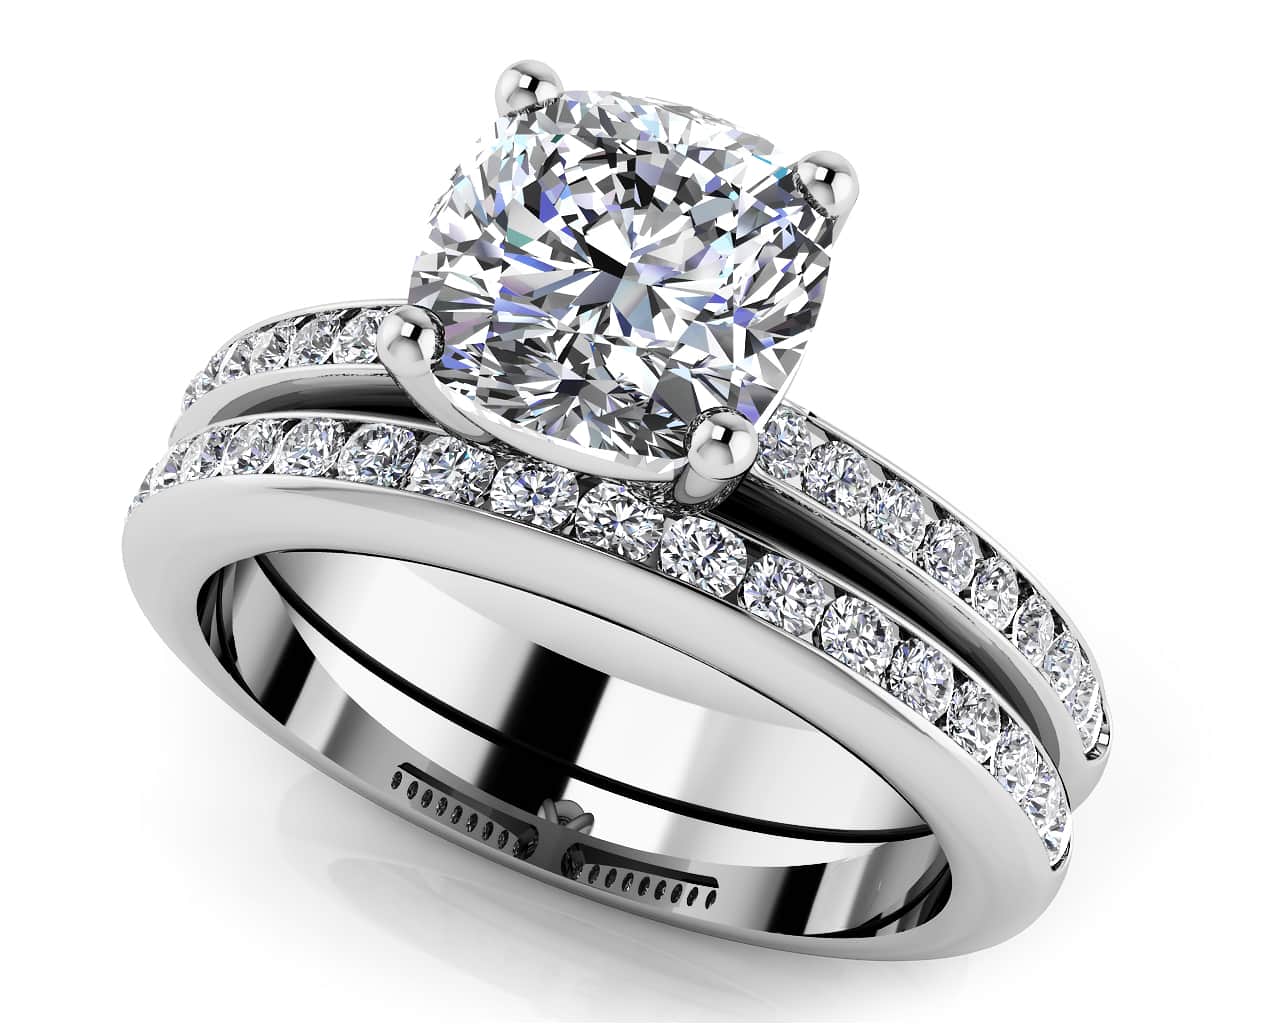 Lovely Cushion Cut Engagement Ring